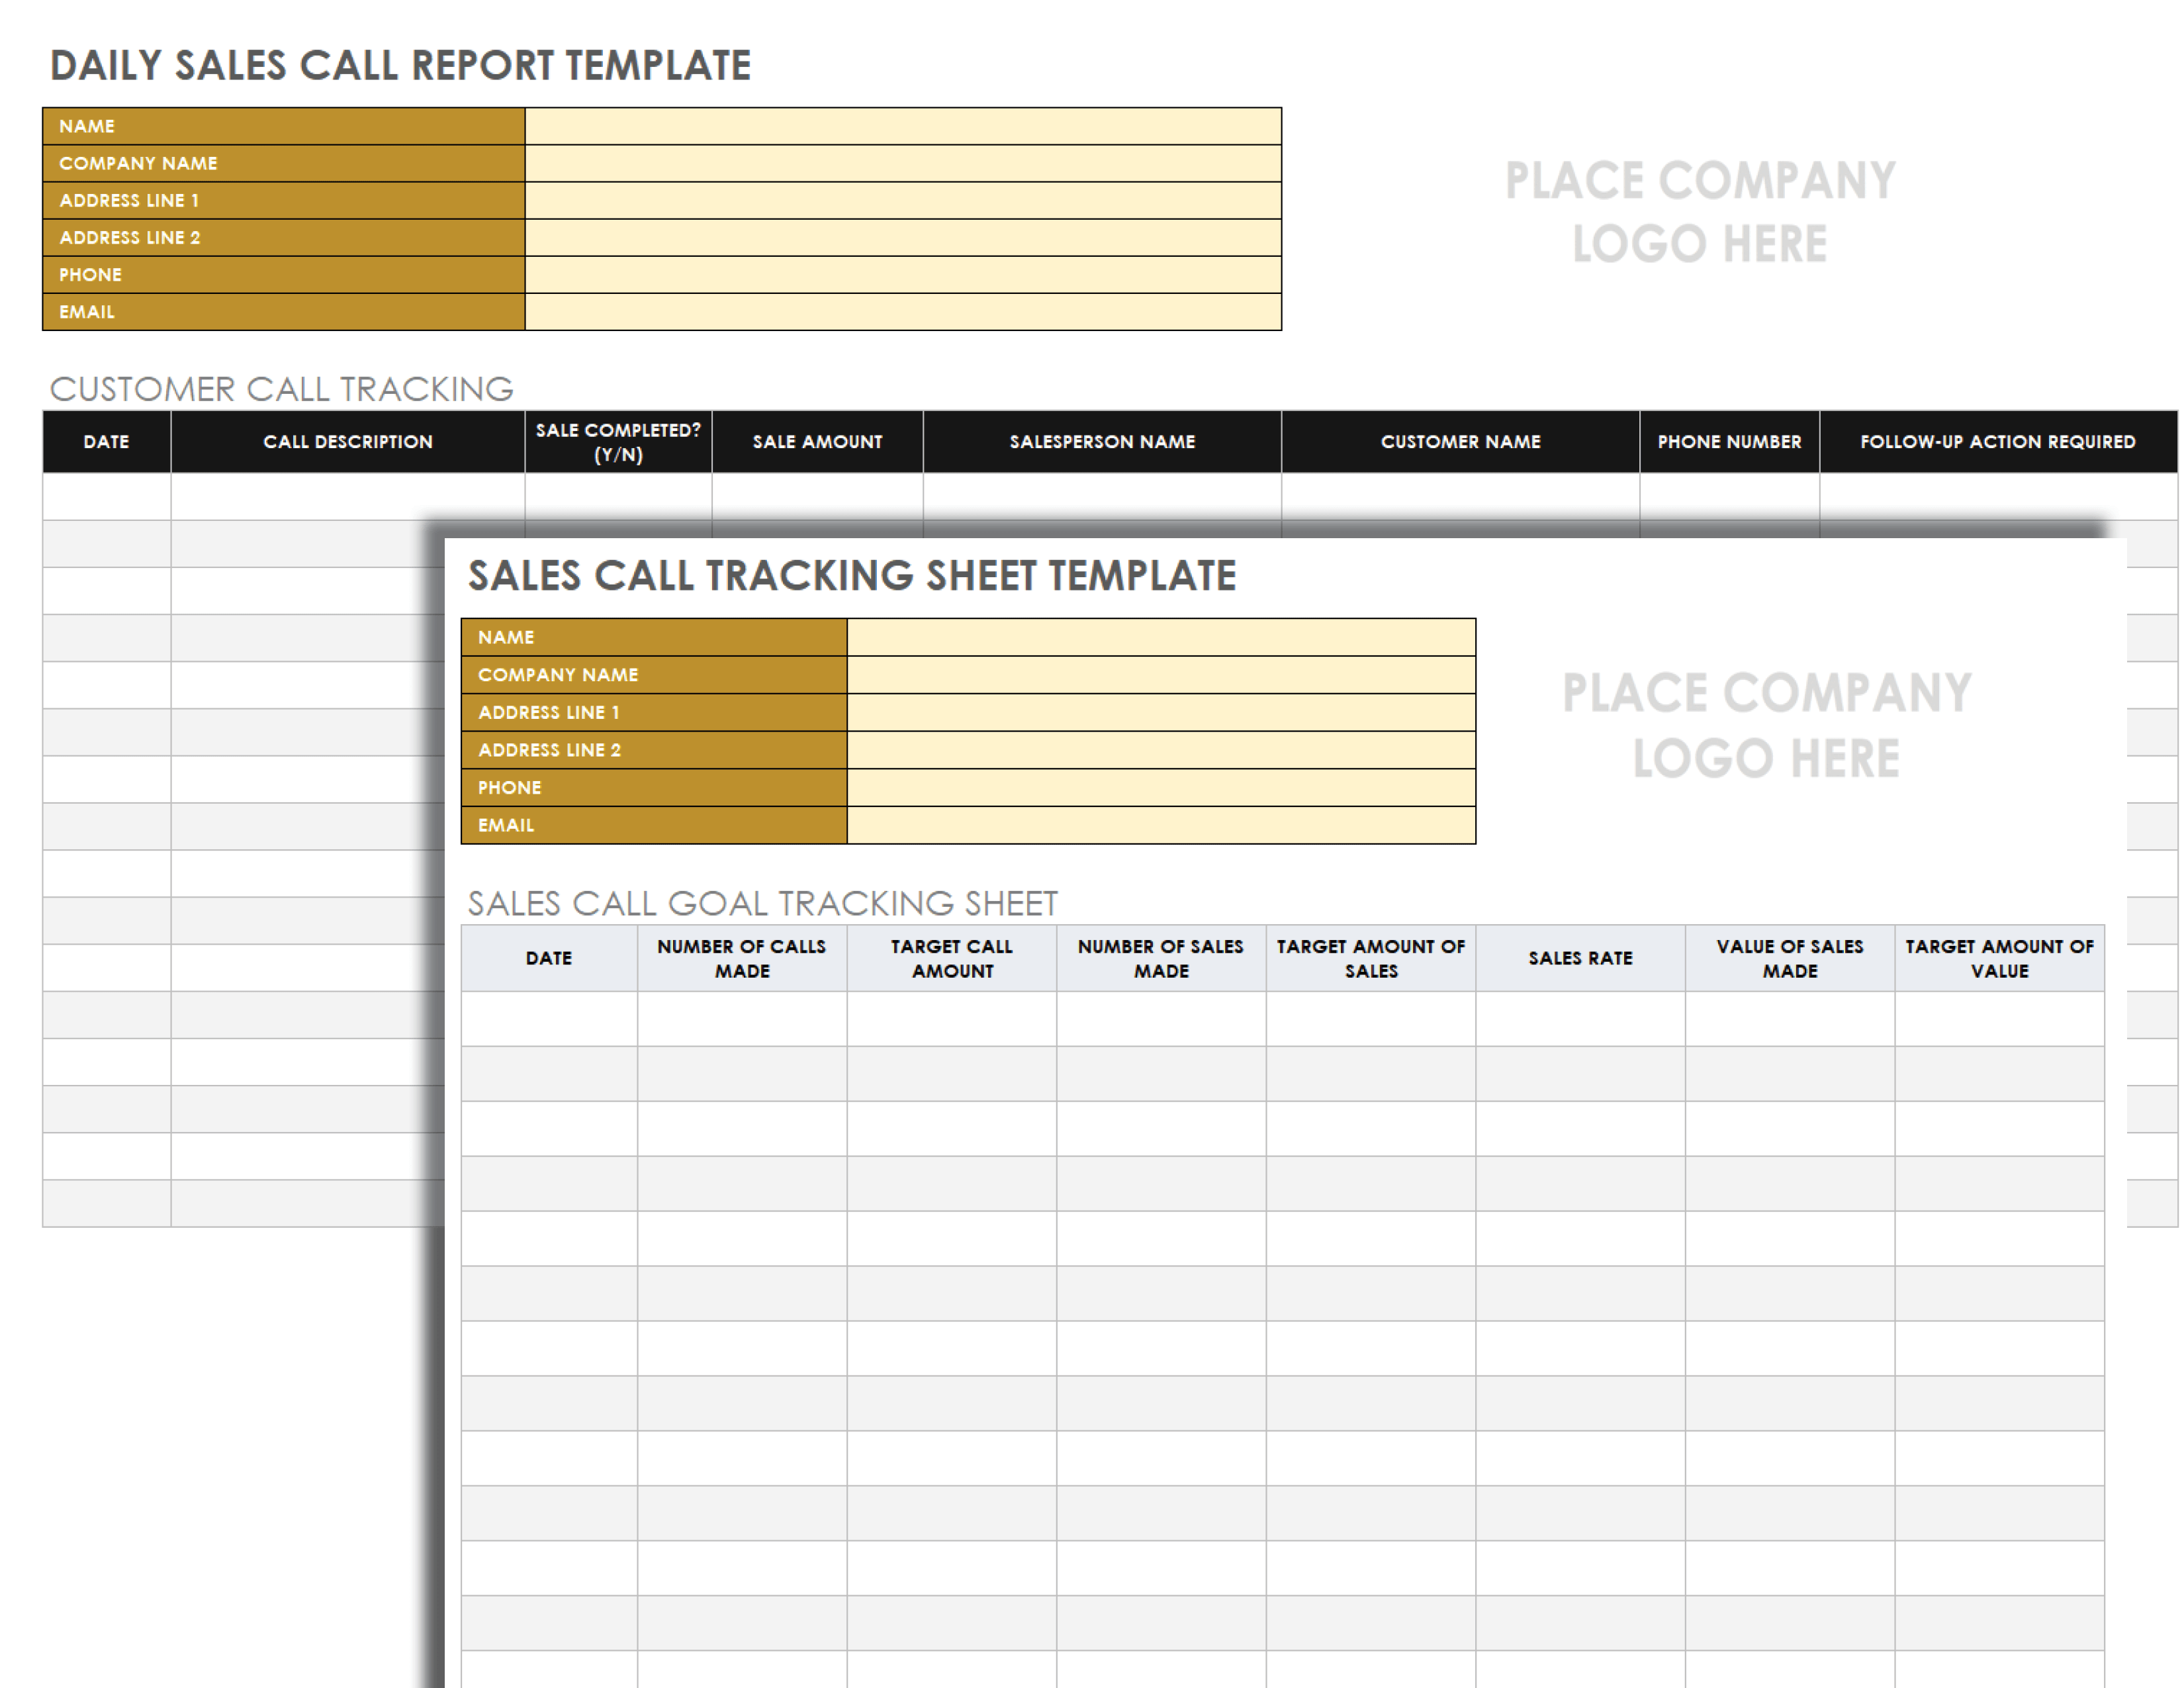 Daily Sales Call Report Template